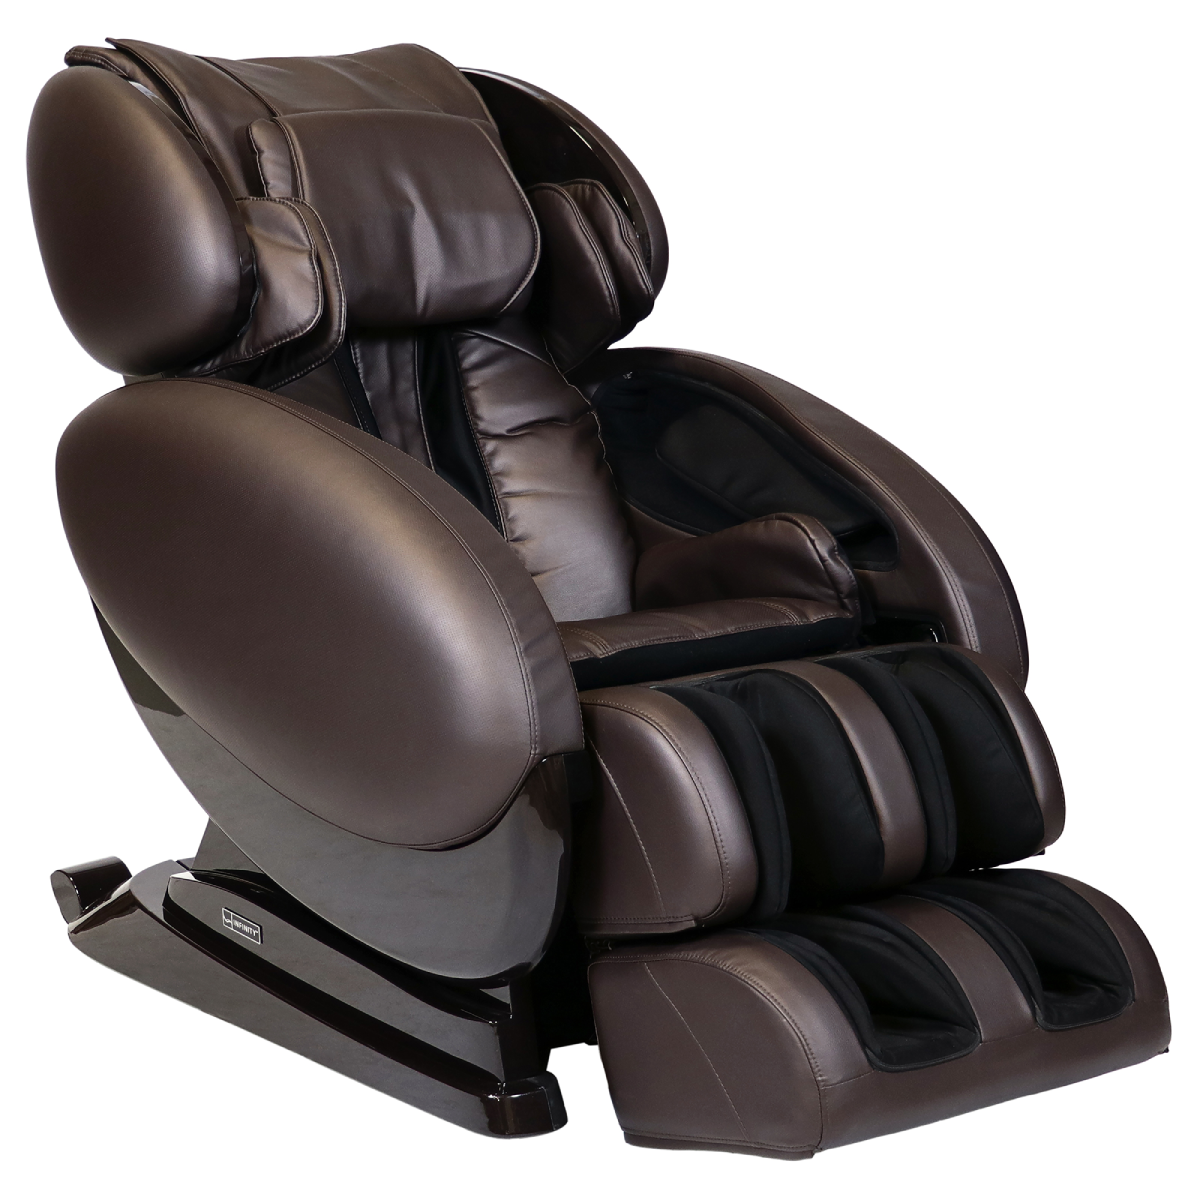 Infinity IT-8500 Plus Massage Chair in Brown - Home Bars USA